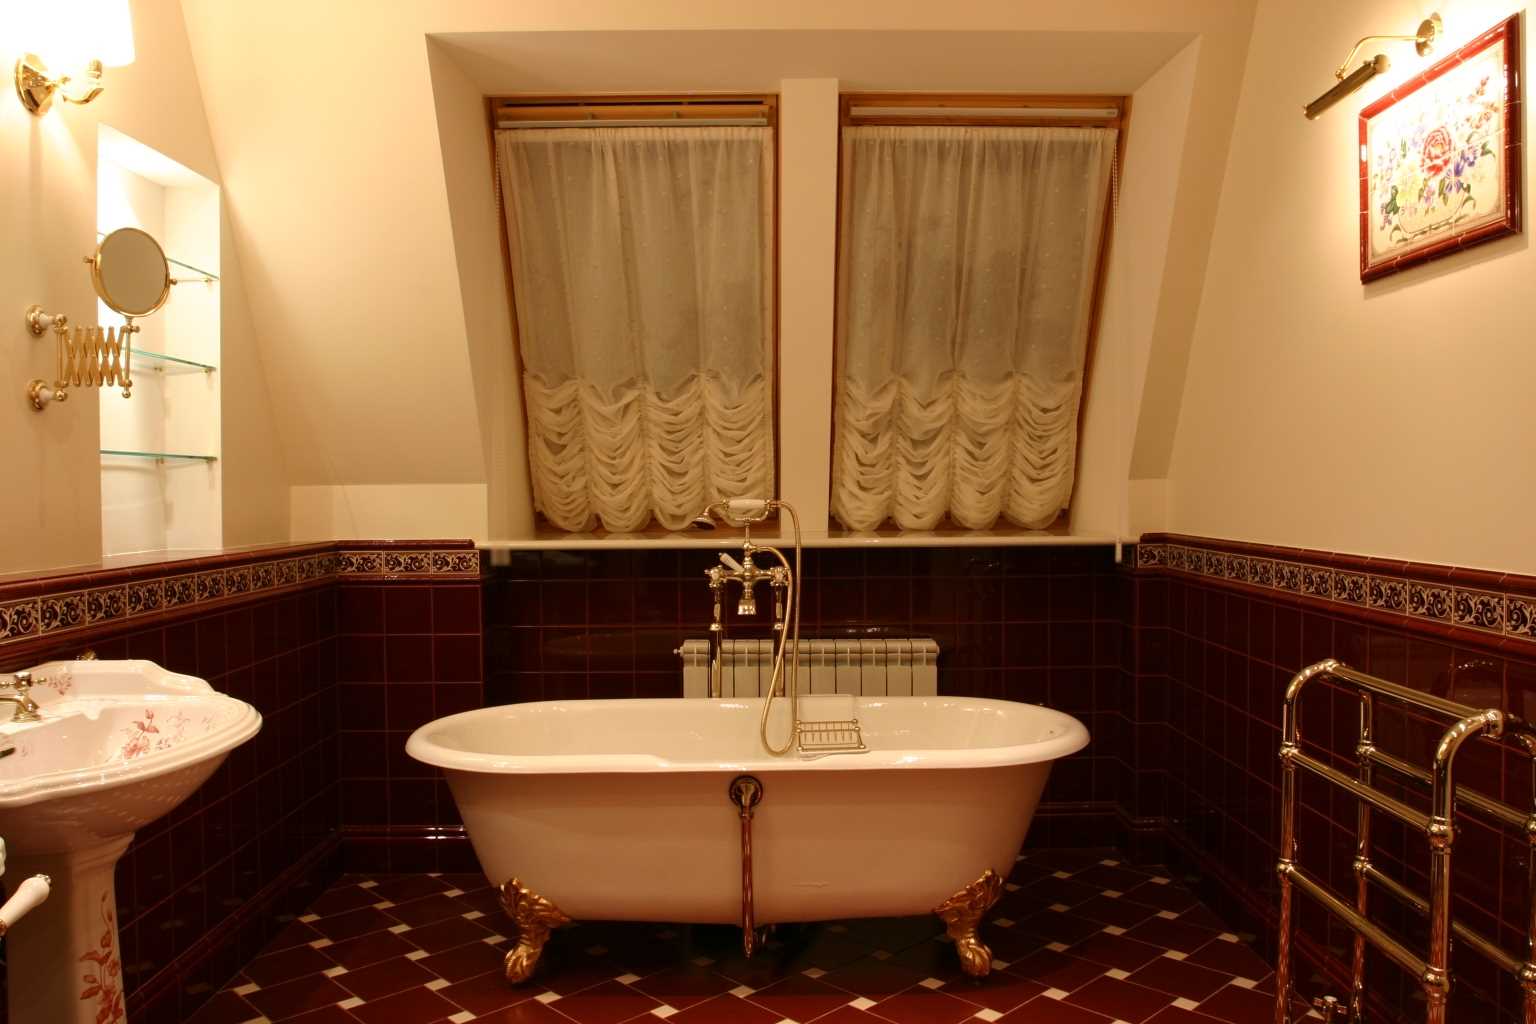 option of a light bathroom in a classic style